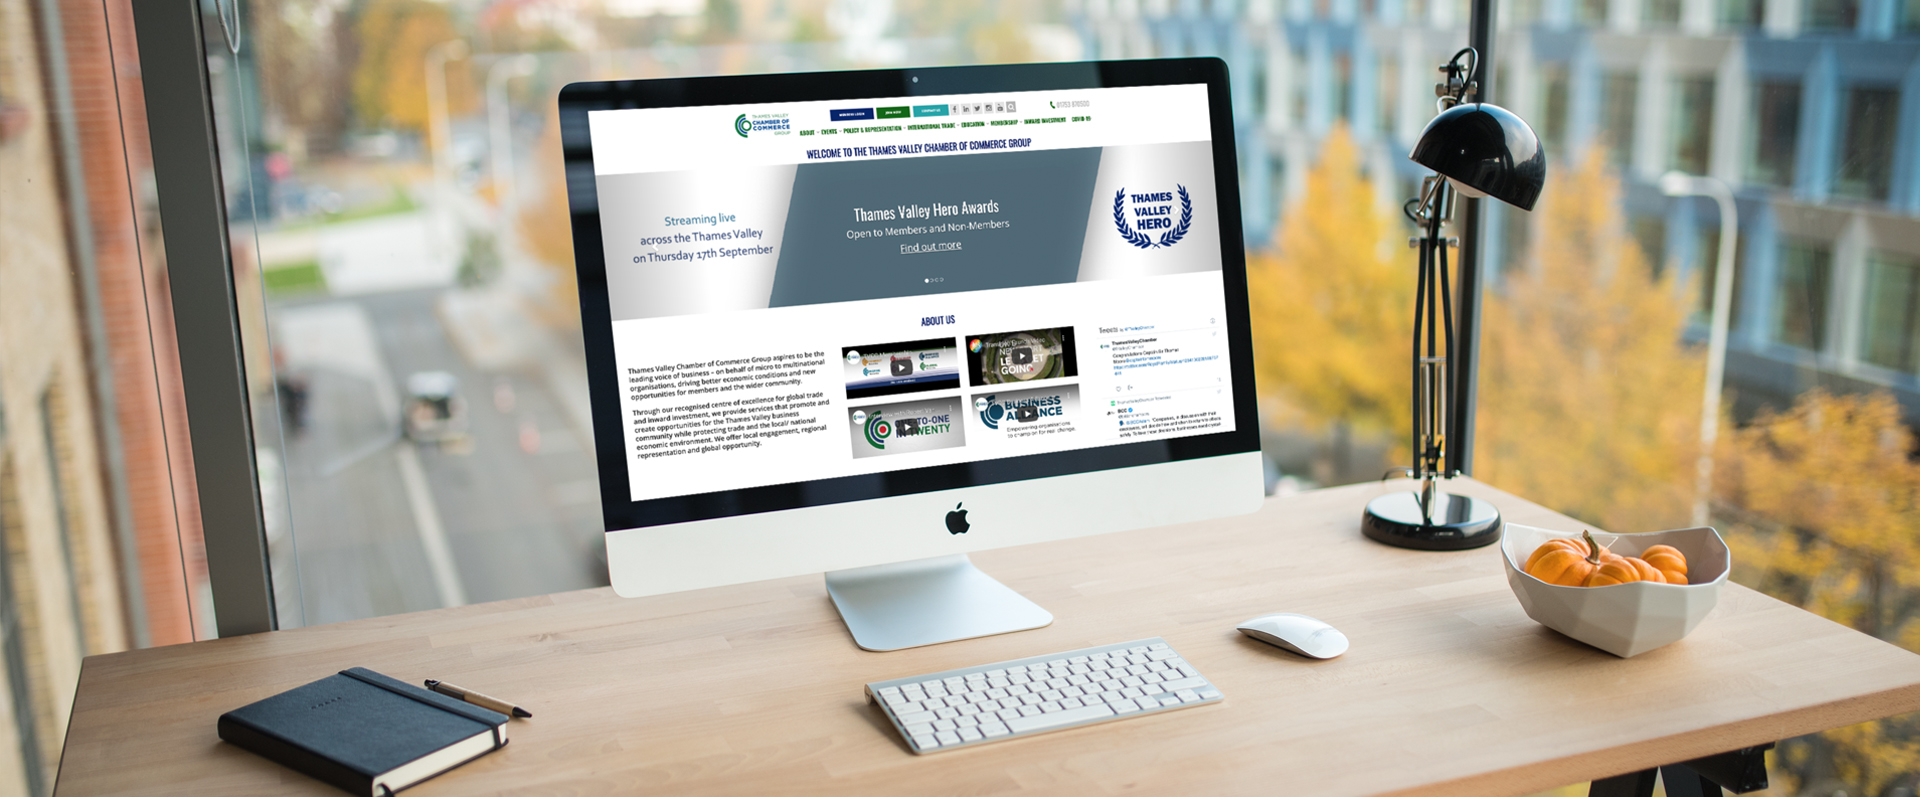 Thames Valley Chamber of Commerce - Increasing Membership Enquiries Case Study 